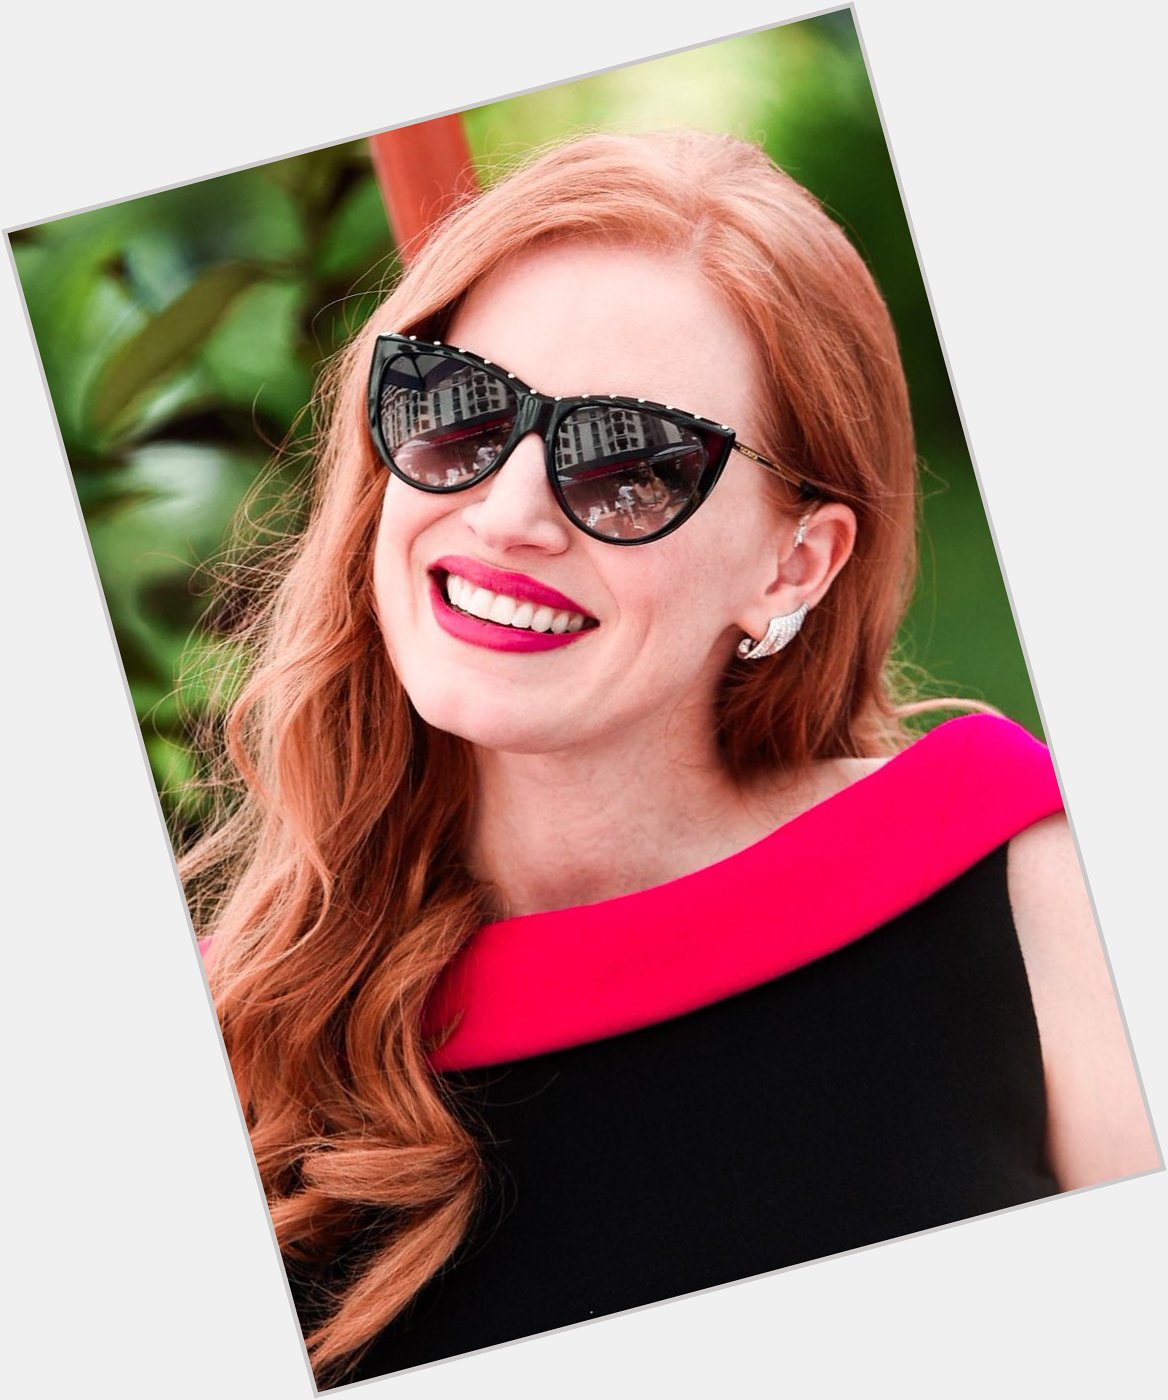 HAPPY BIRTHDAY TO THE QUEEN JESSICA CHASTAIN!!! 